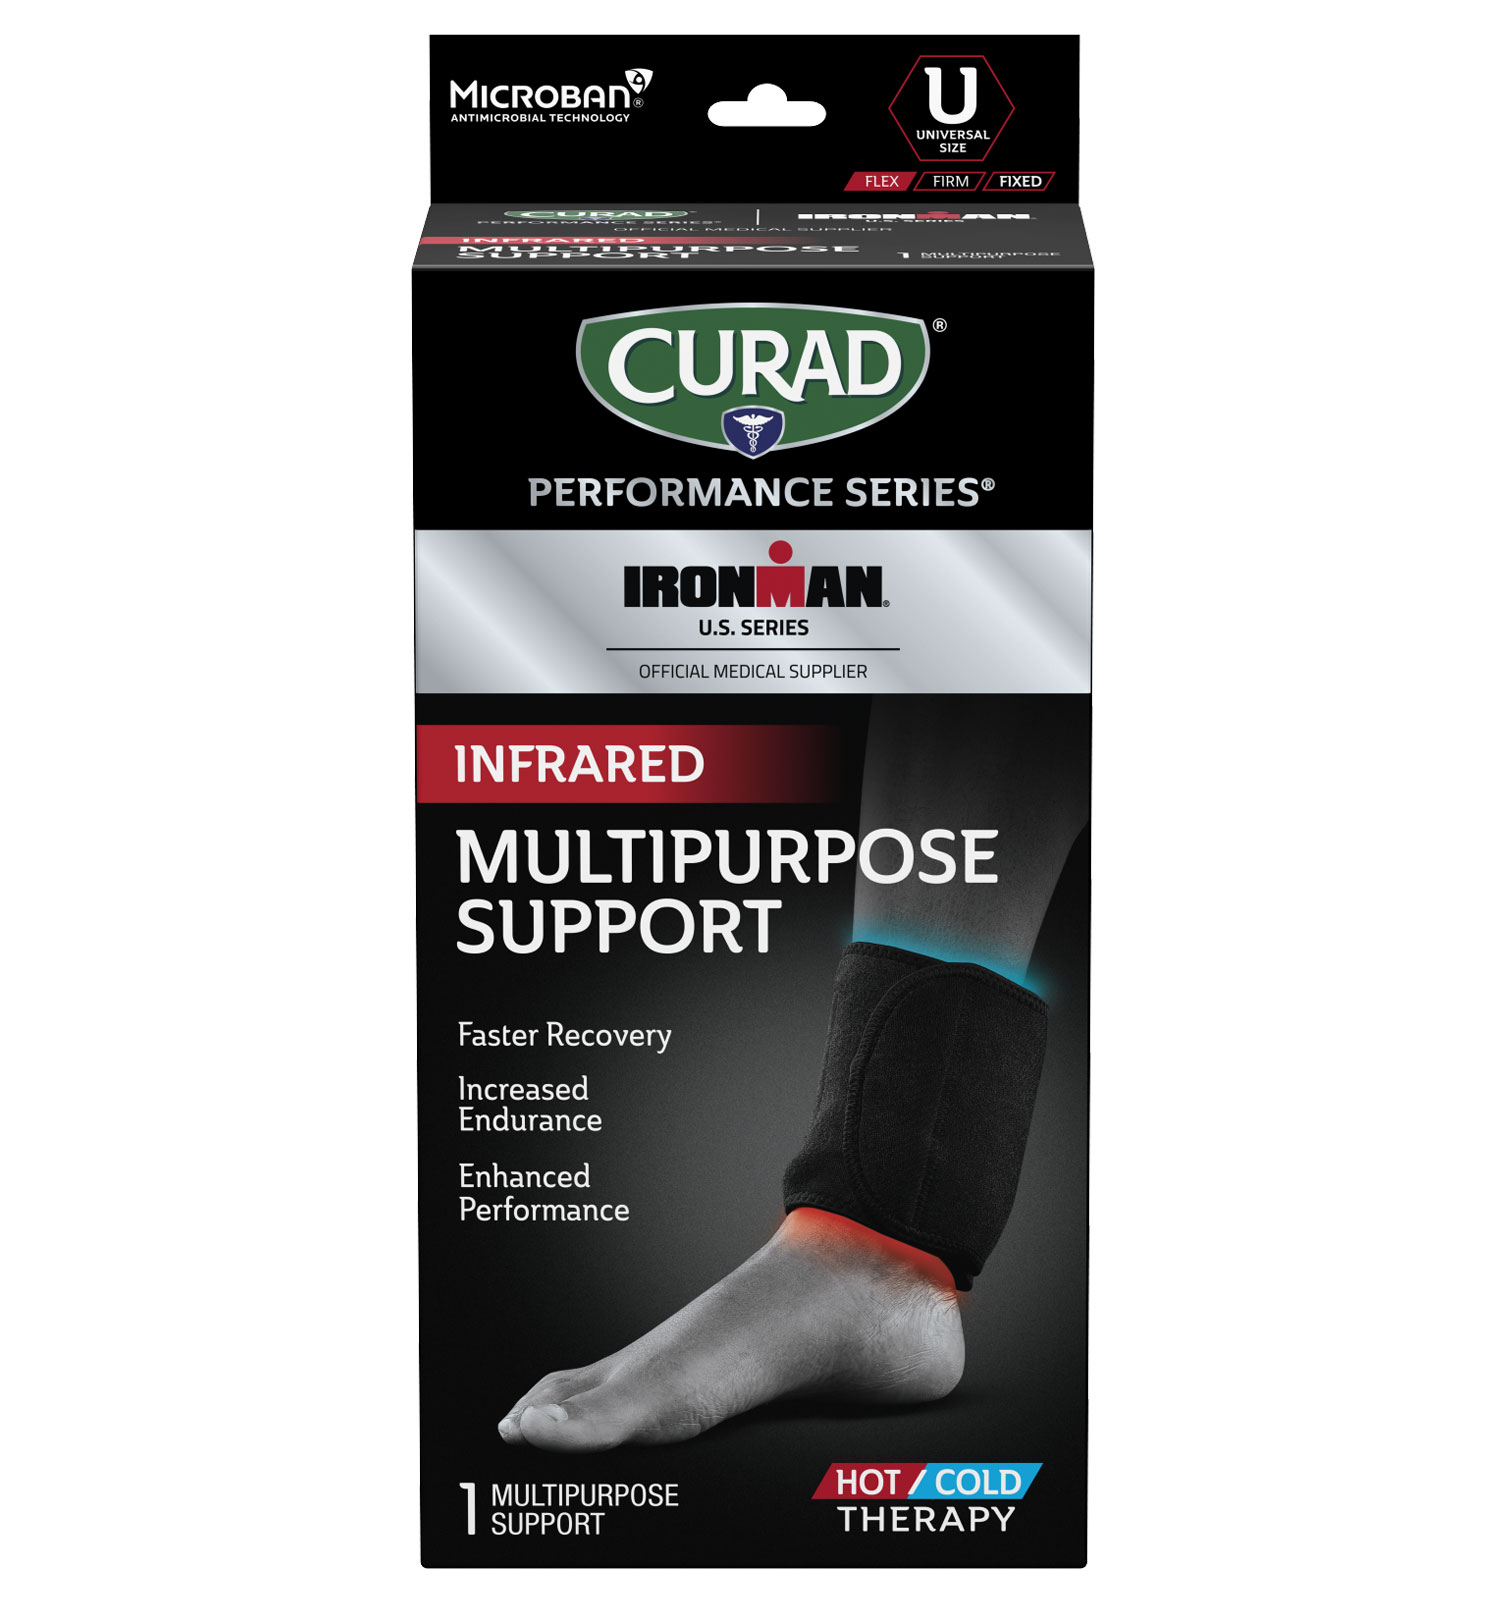 CURAD Performance Series IRONMAN Infrared Ankle Support, Elastic